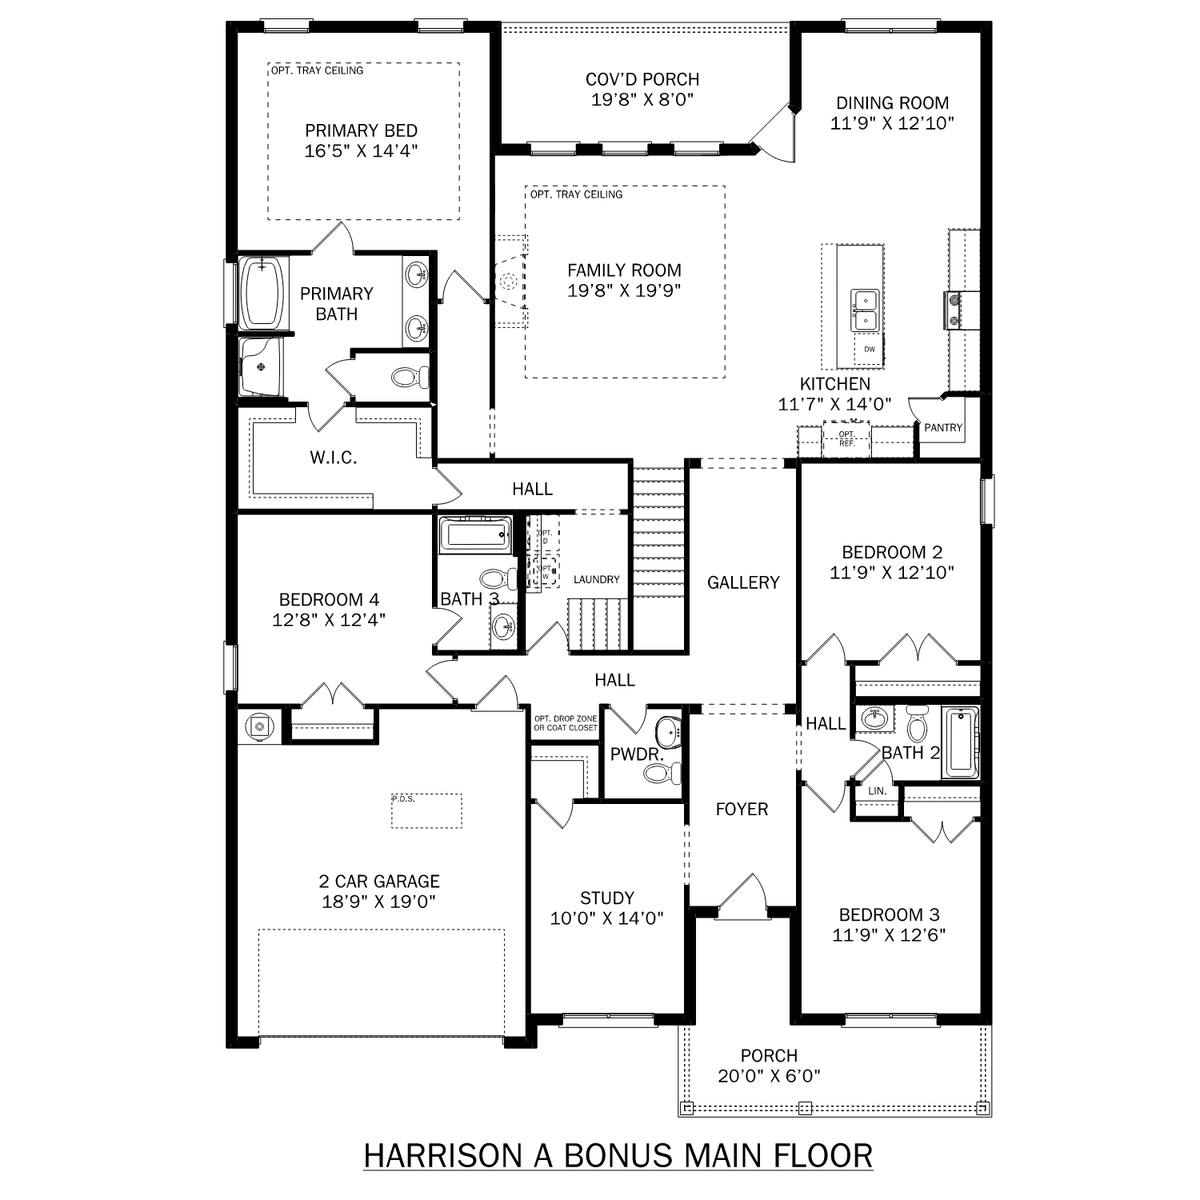 1 - The Harrison with Bonus buildable floor plan layout in Davidson Homes' River Road Estates community.